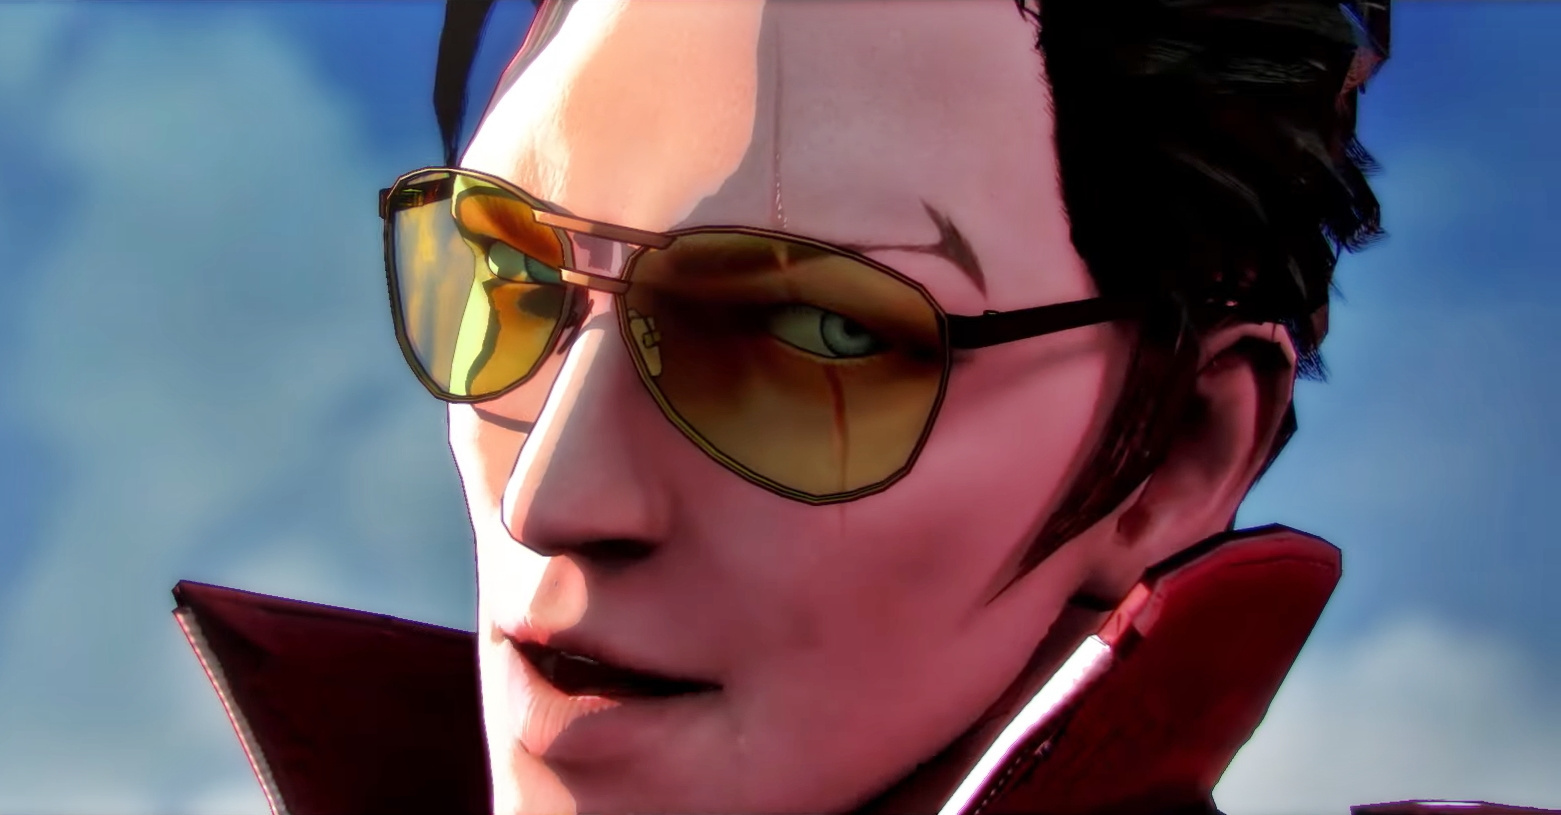 no more heroes 3 release date